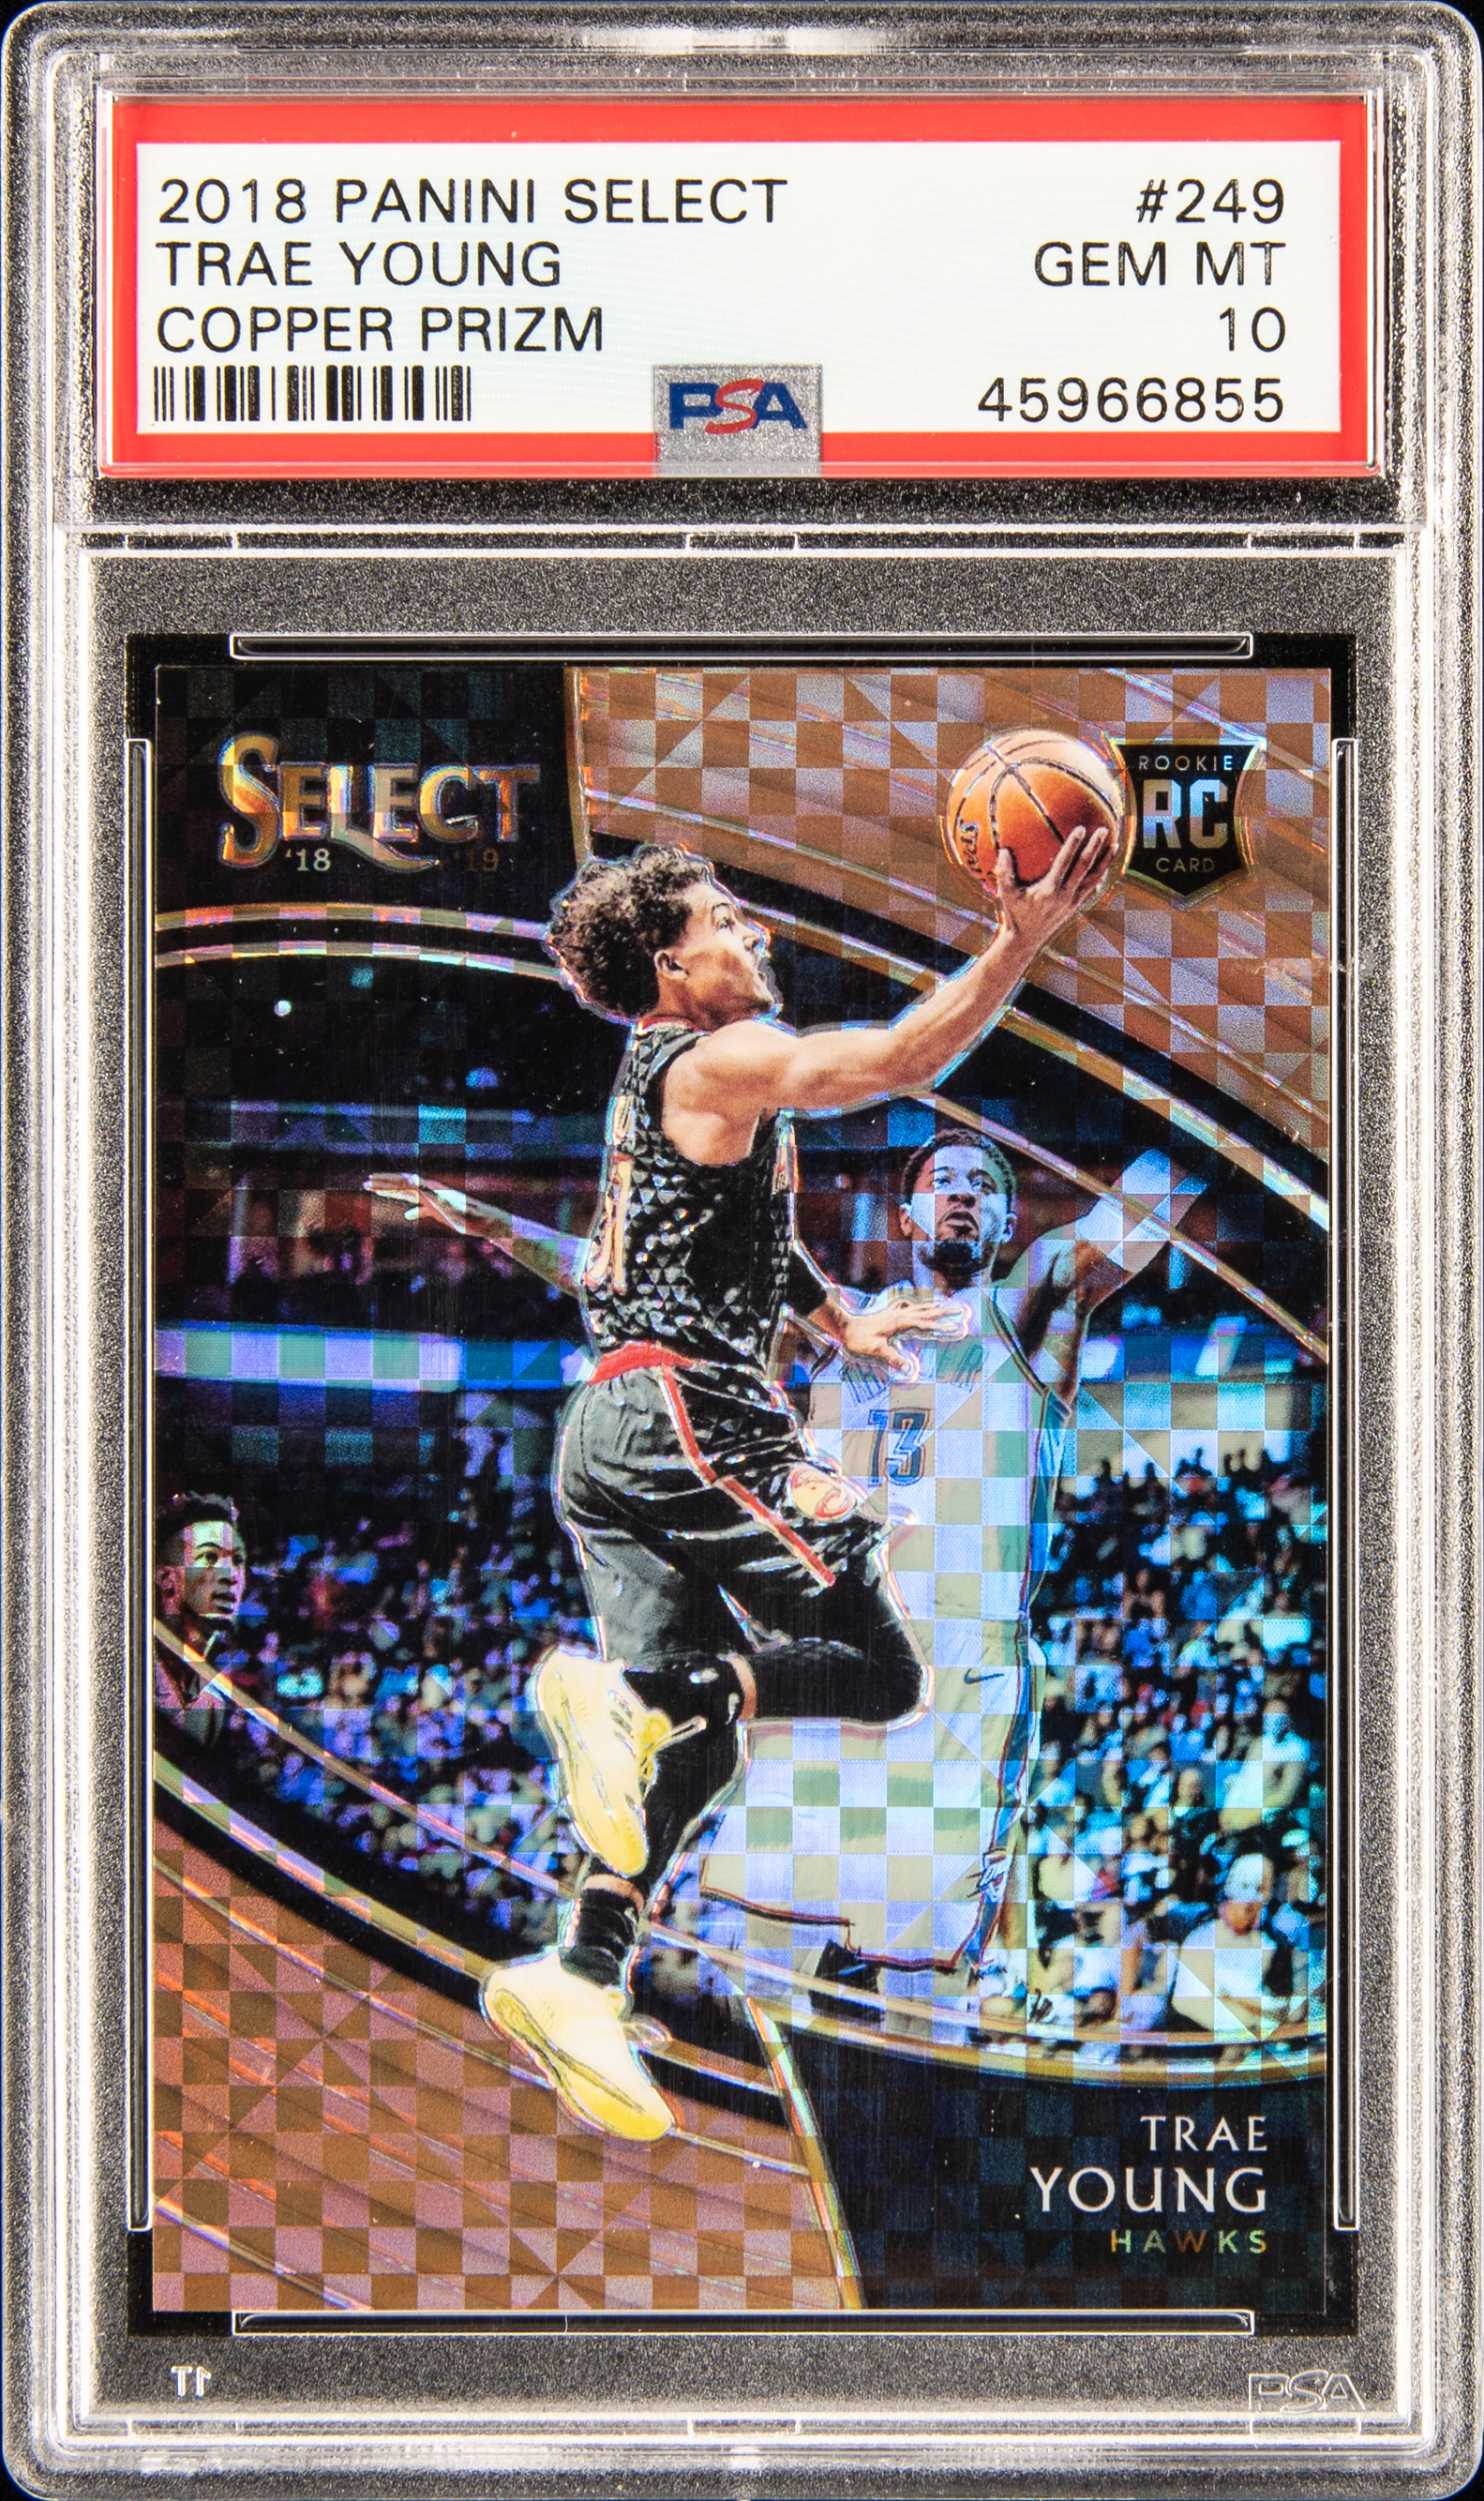 2018-19 Panini Select Copper Prizm #249 Trae Young Rookie Card (#07/60) – PSA GEM MT 10